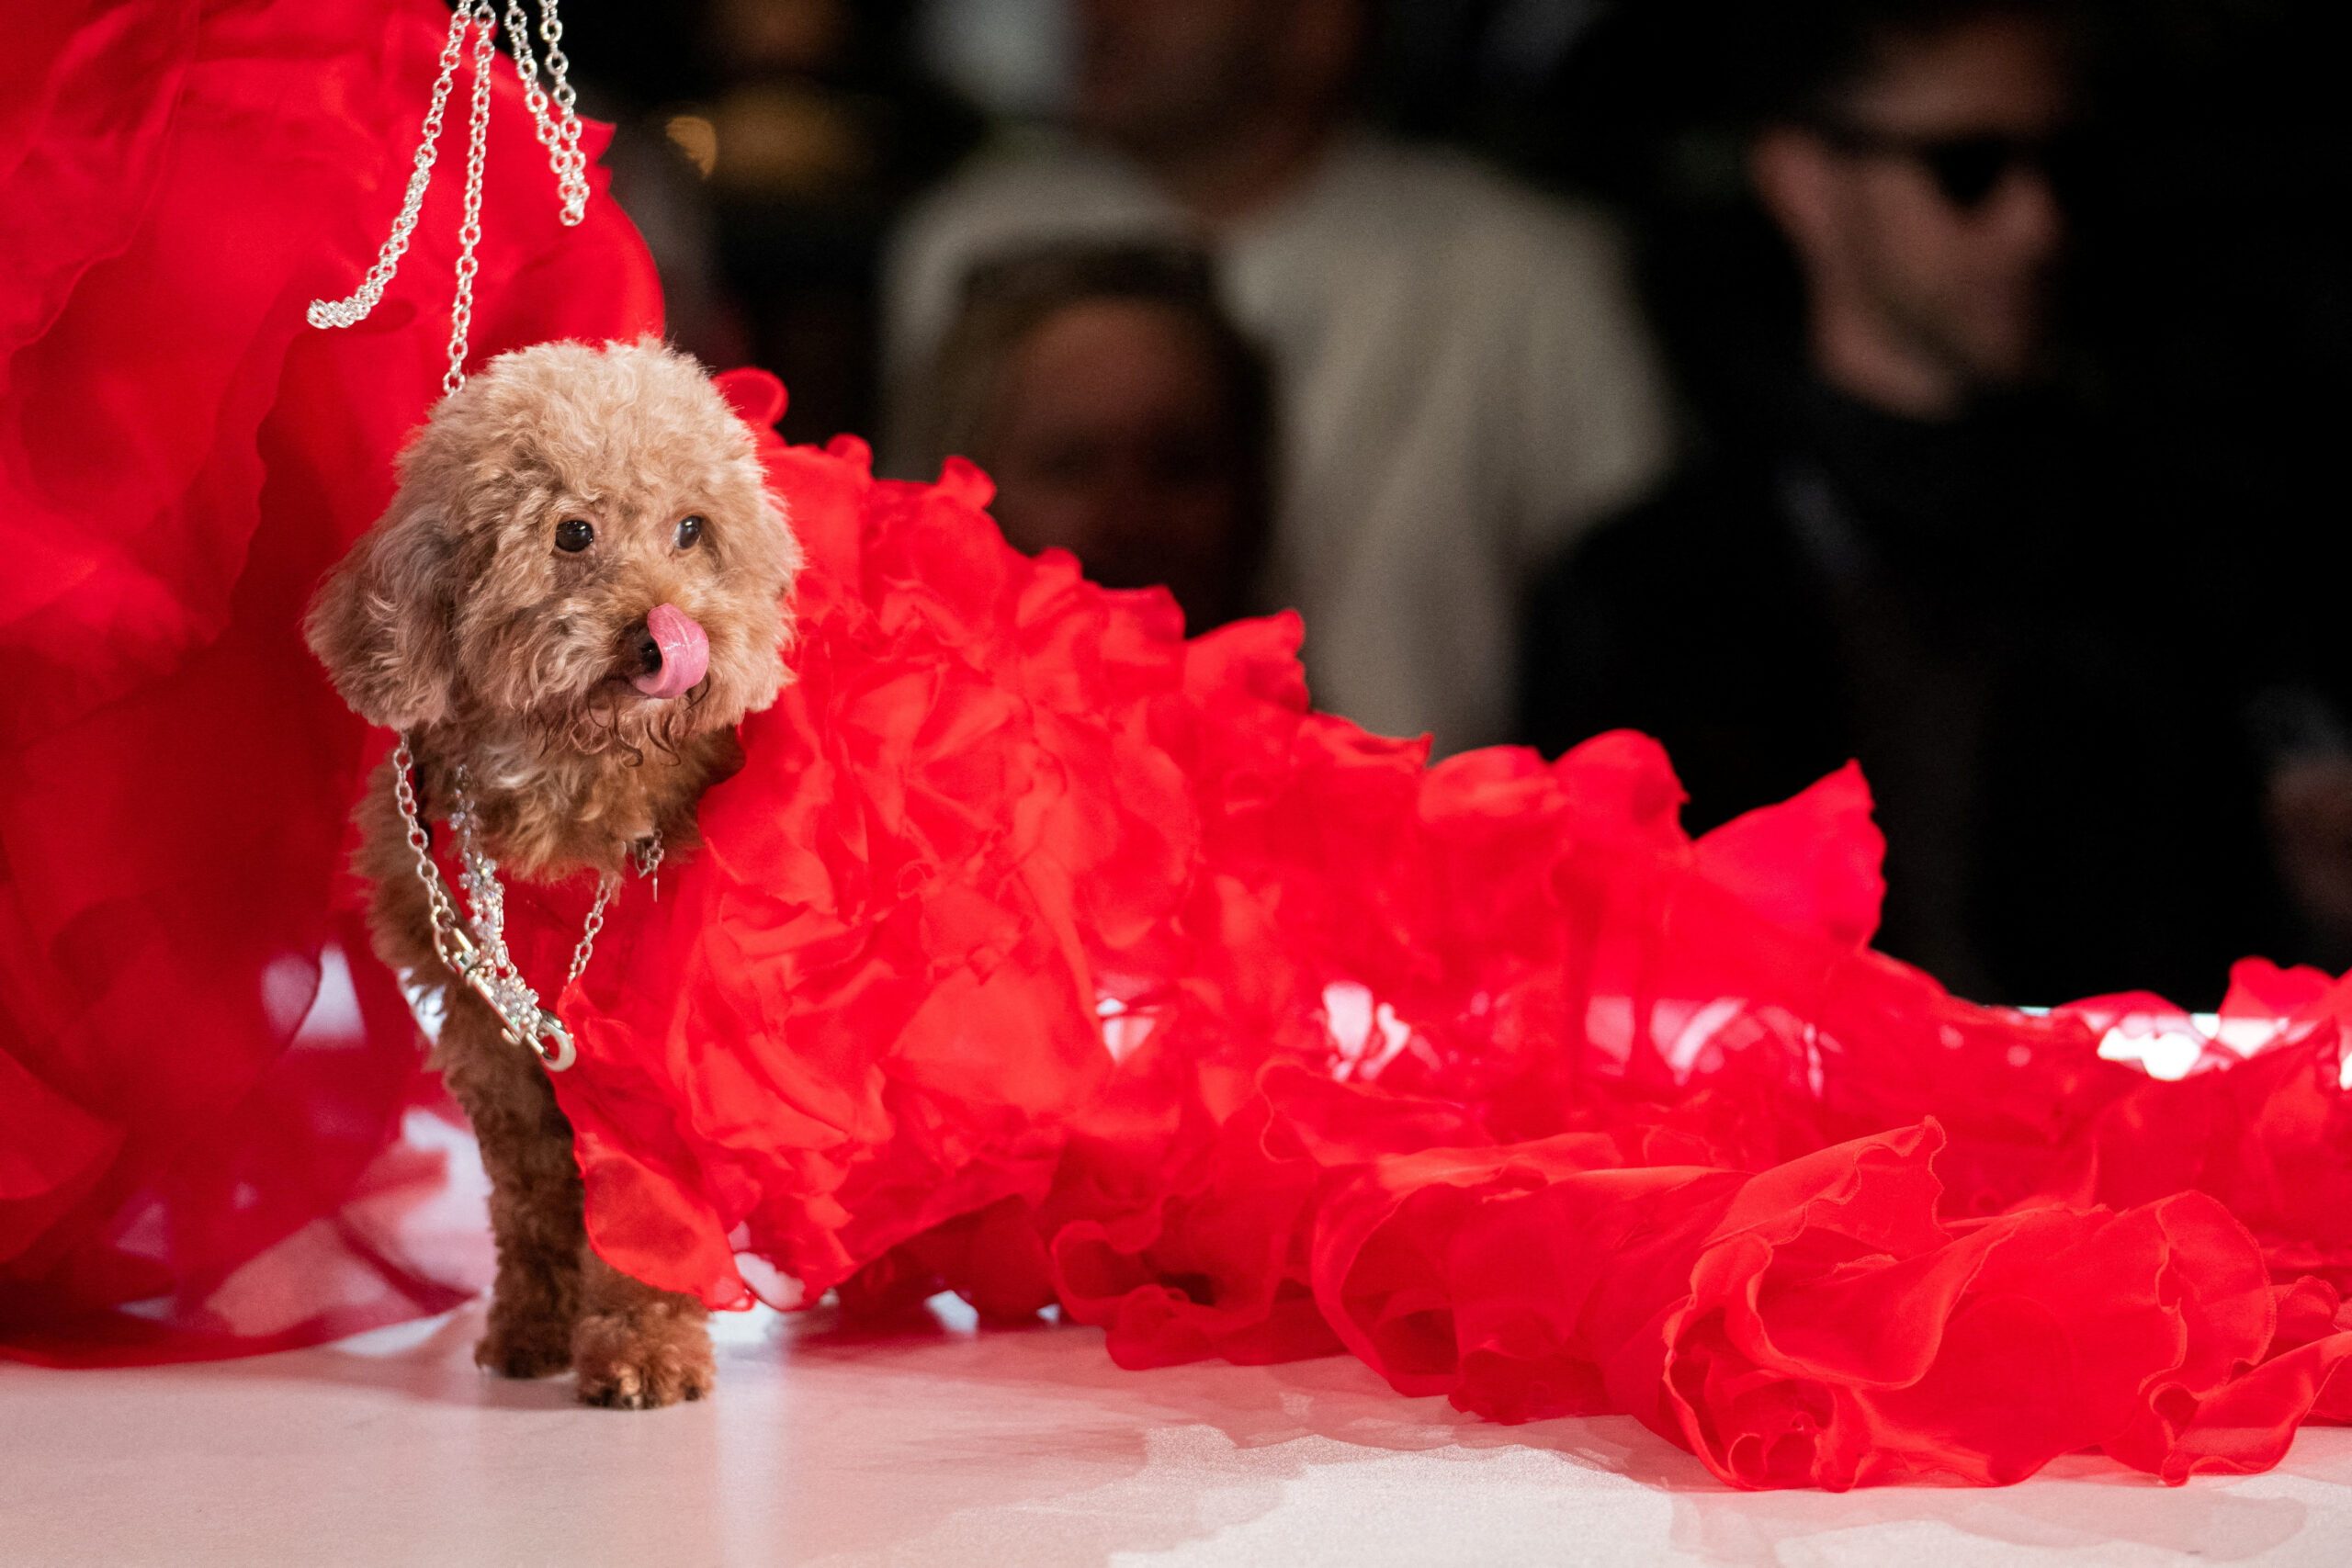 LOOK: Dogs hit the catwalk at New York Fashion Week